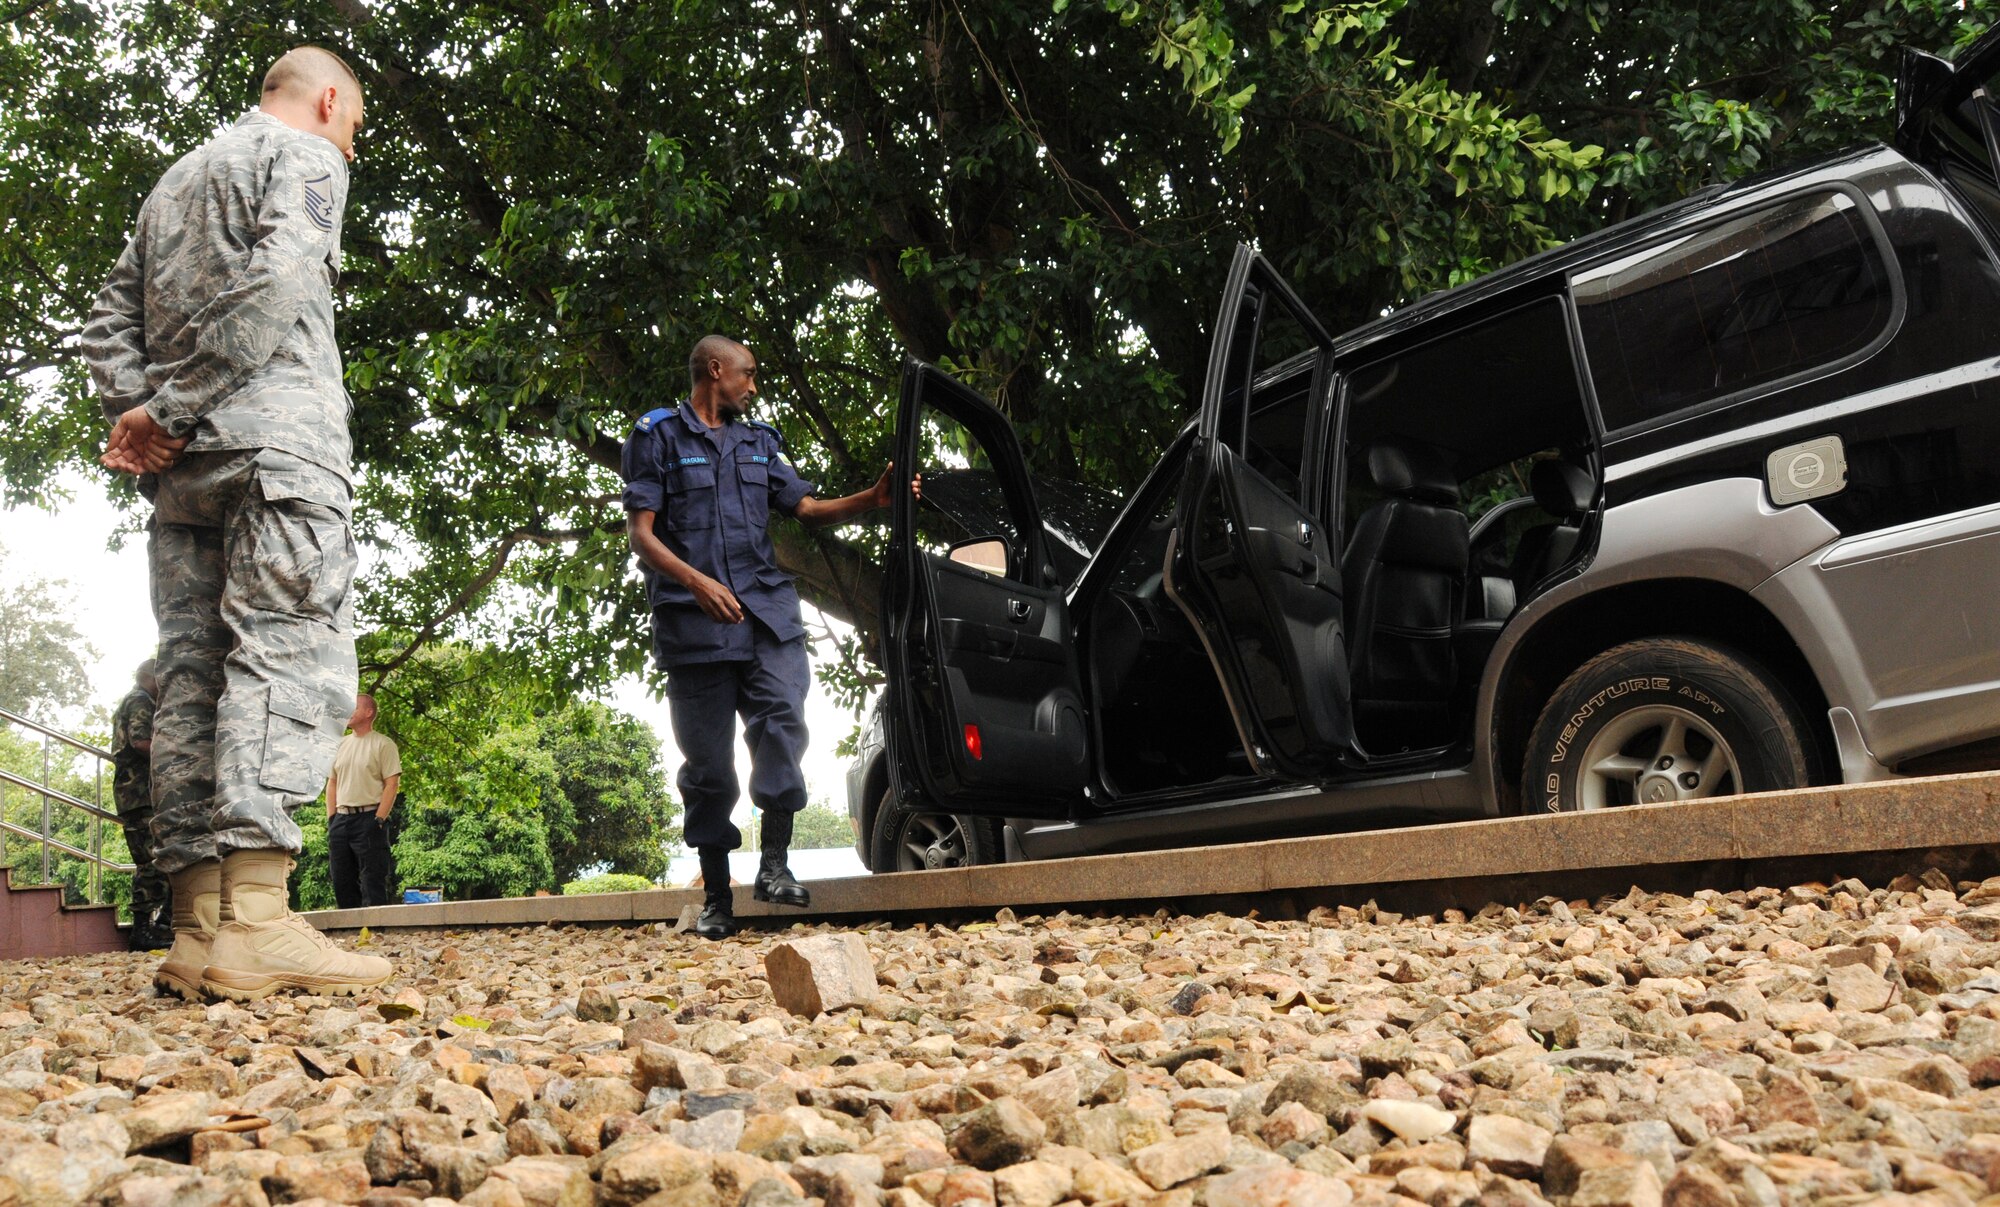 KIGALI, Rwanda – Master Sgt. Garrett Smith, theater security events manager for the 17th Air Force Security Forces Division, acts as a handcuffed driver during a scenario where Rwandan National Police and Defense Force perform a vehicle search Oct. 12, 2011. The week-long event provided an exchange of ideas between USAF Security Forces, 25 RDF officers and three civil police officers attending the event. Two days of classroom activity provided information on the basics of defending an airbase, principles of defense and vehicle searches. The remaining two days of hands-on training put those techniques into practical application perspective. (U.S. Air Force photo by Staff Sgt. Stefanie Torres)